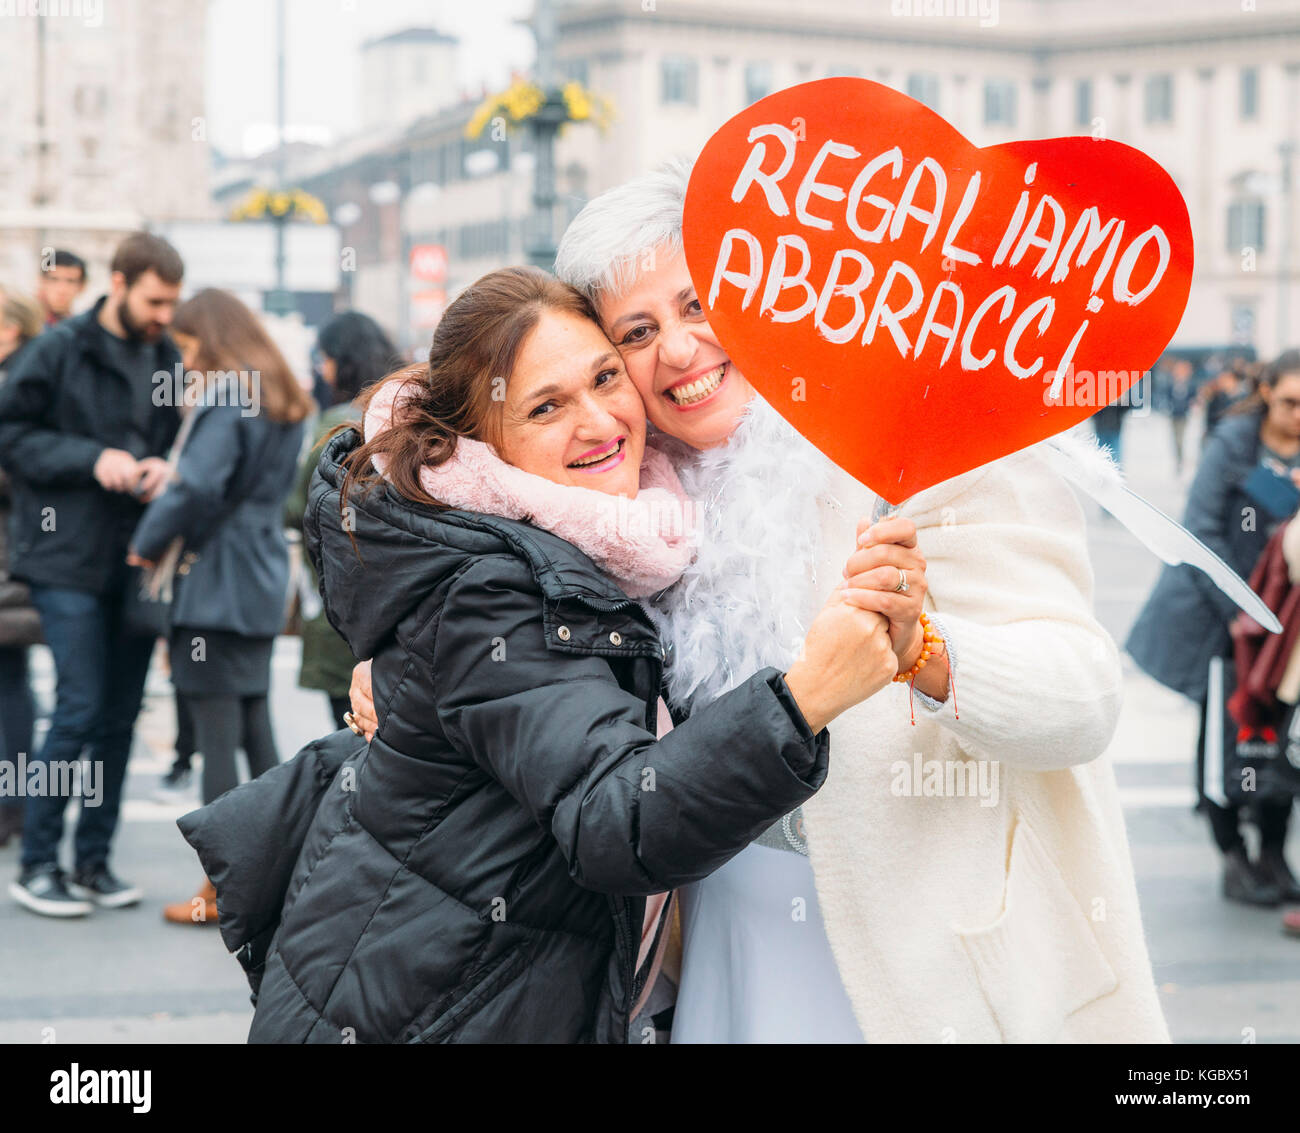 Women dressed as angels giving 'free hugs' to strangers at Milan's Piazza Duomo Stock Photo